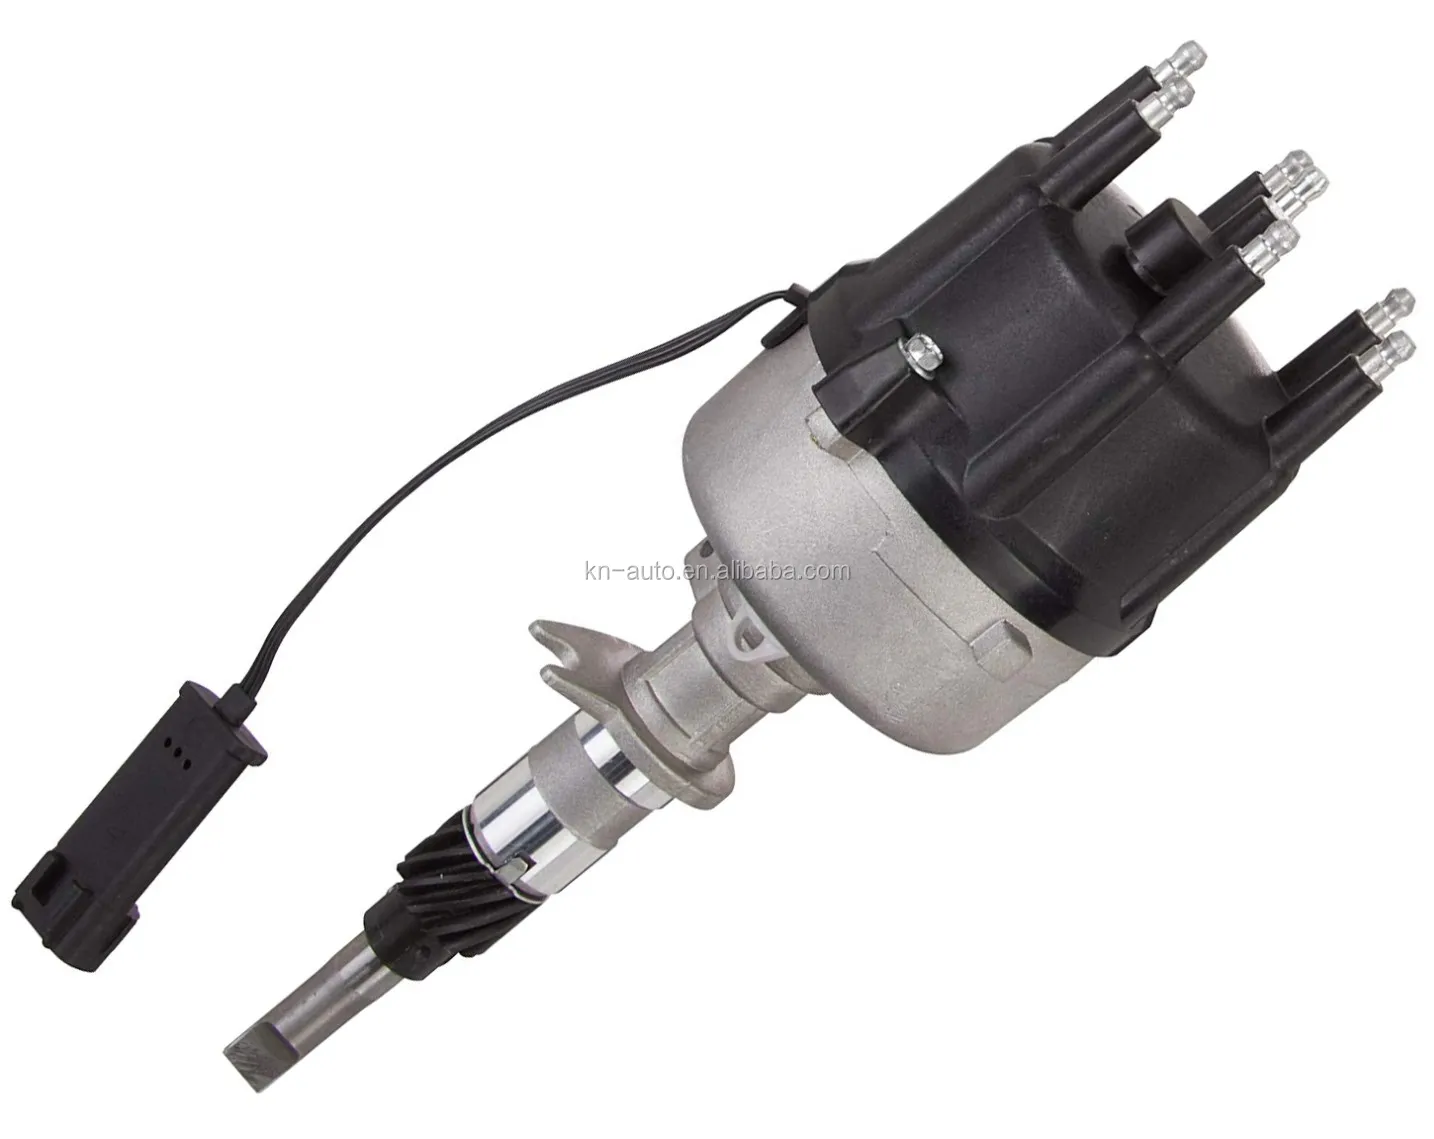 Auto Engine Parts Ignition Distributor For Jeep Wrangler  Ch17  56041034ab - Buy High Quality Auto Engine Parts Ignition Distributor For Jeep  Wrangler  Ch17 56041034ab,China Popular Auto Engine Parts Ignition  Distributor